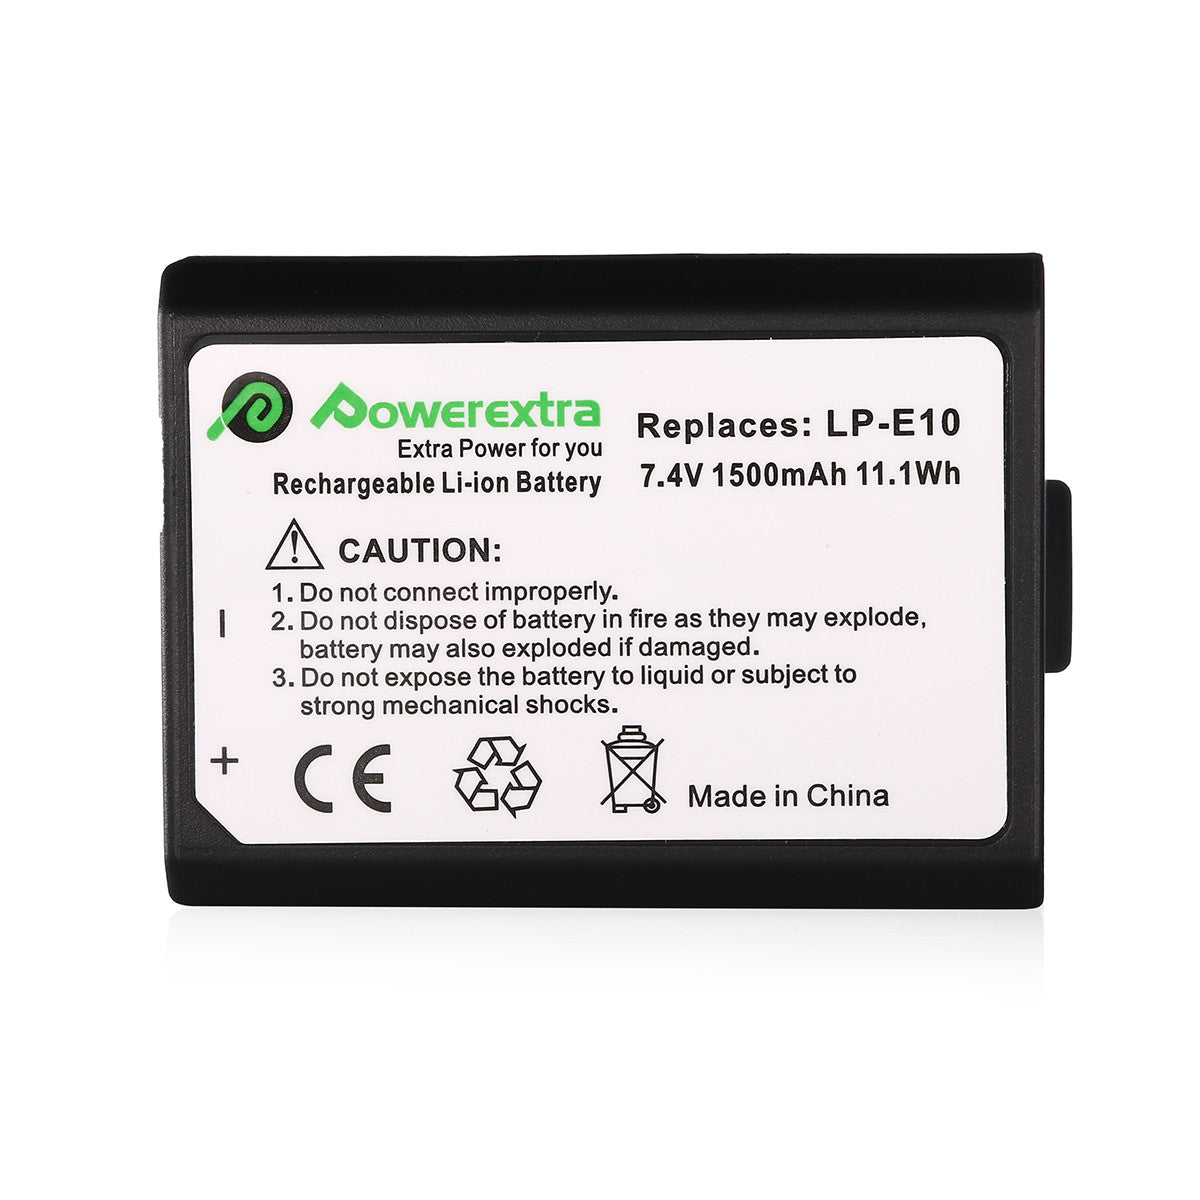 Powerextra LP-E10 Replacement Battery